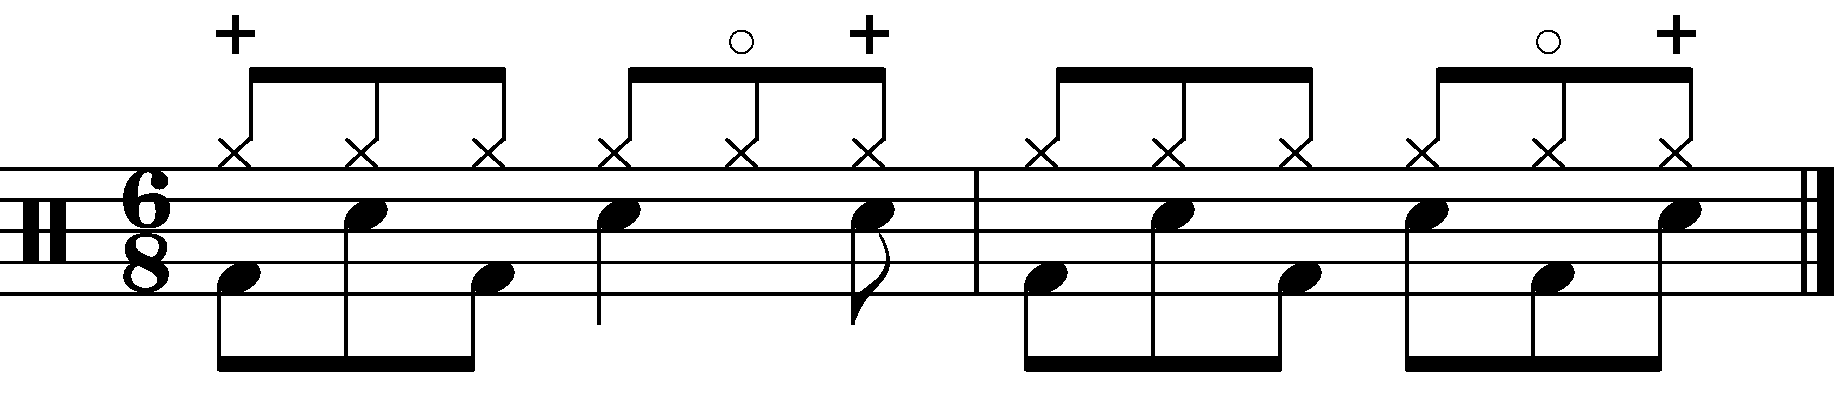 The Hi Hat Part for example 3 with groove added in